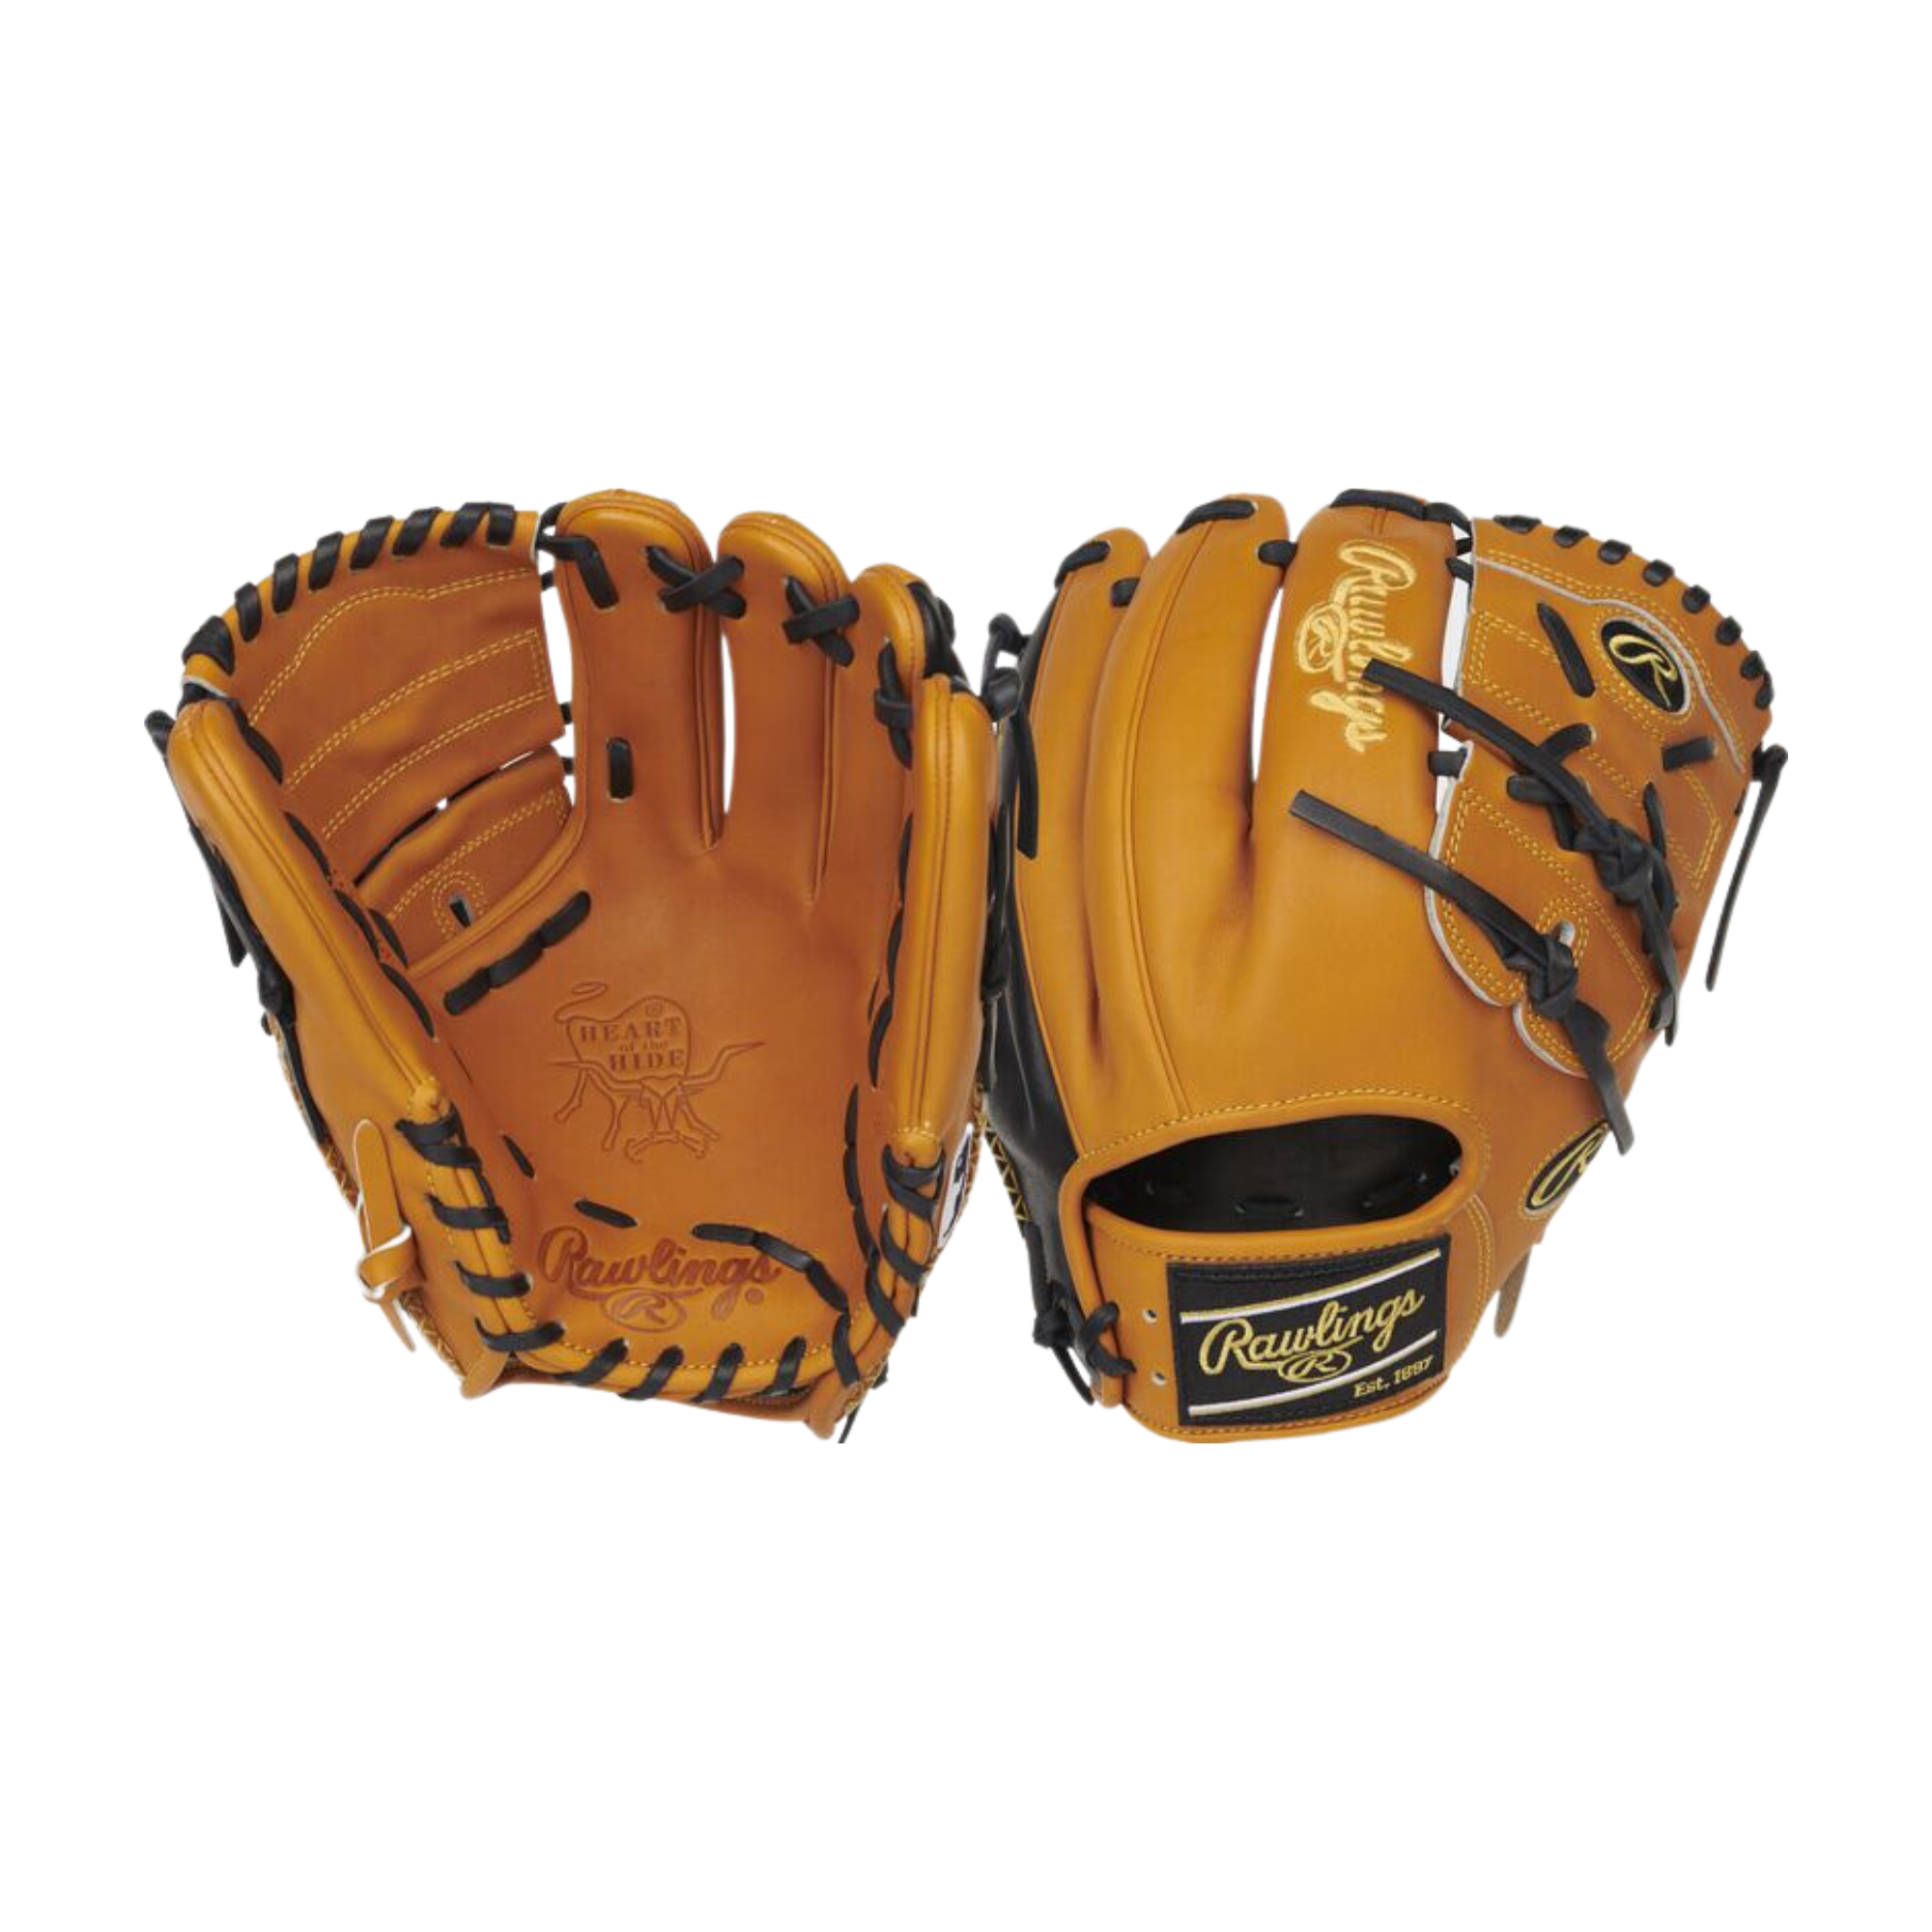 Rawlings Heart of the Hide 11.75-inch Infield/Pitcher's Glove